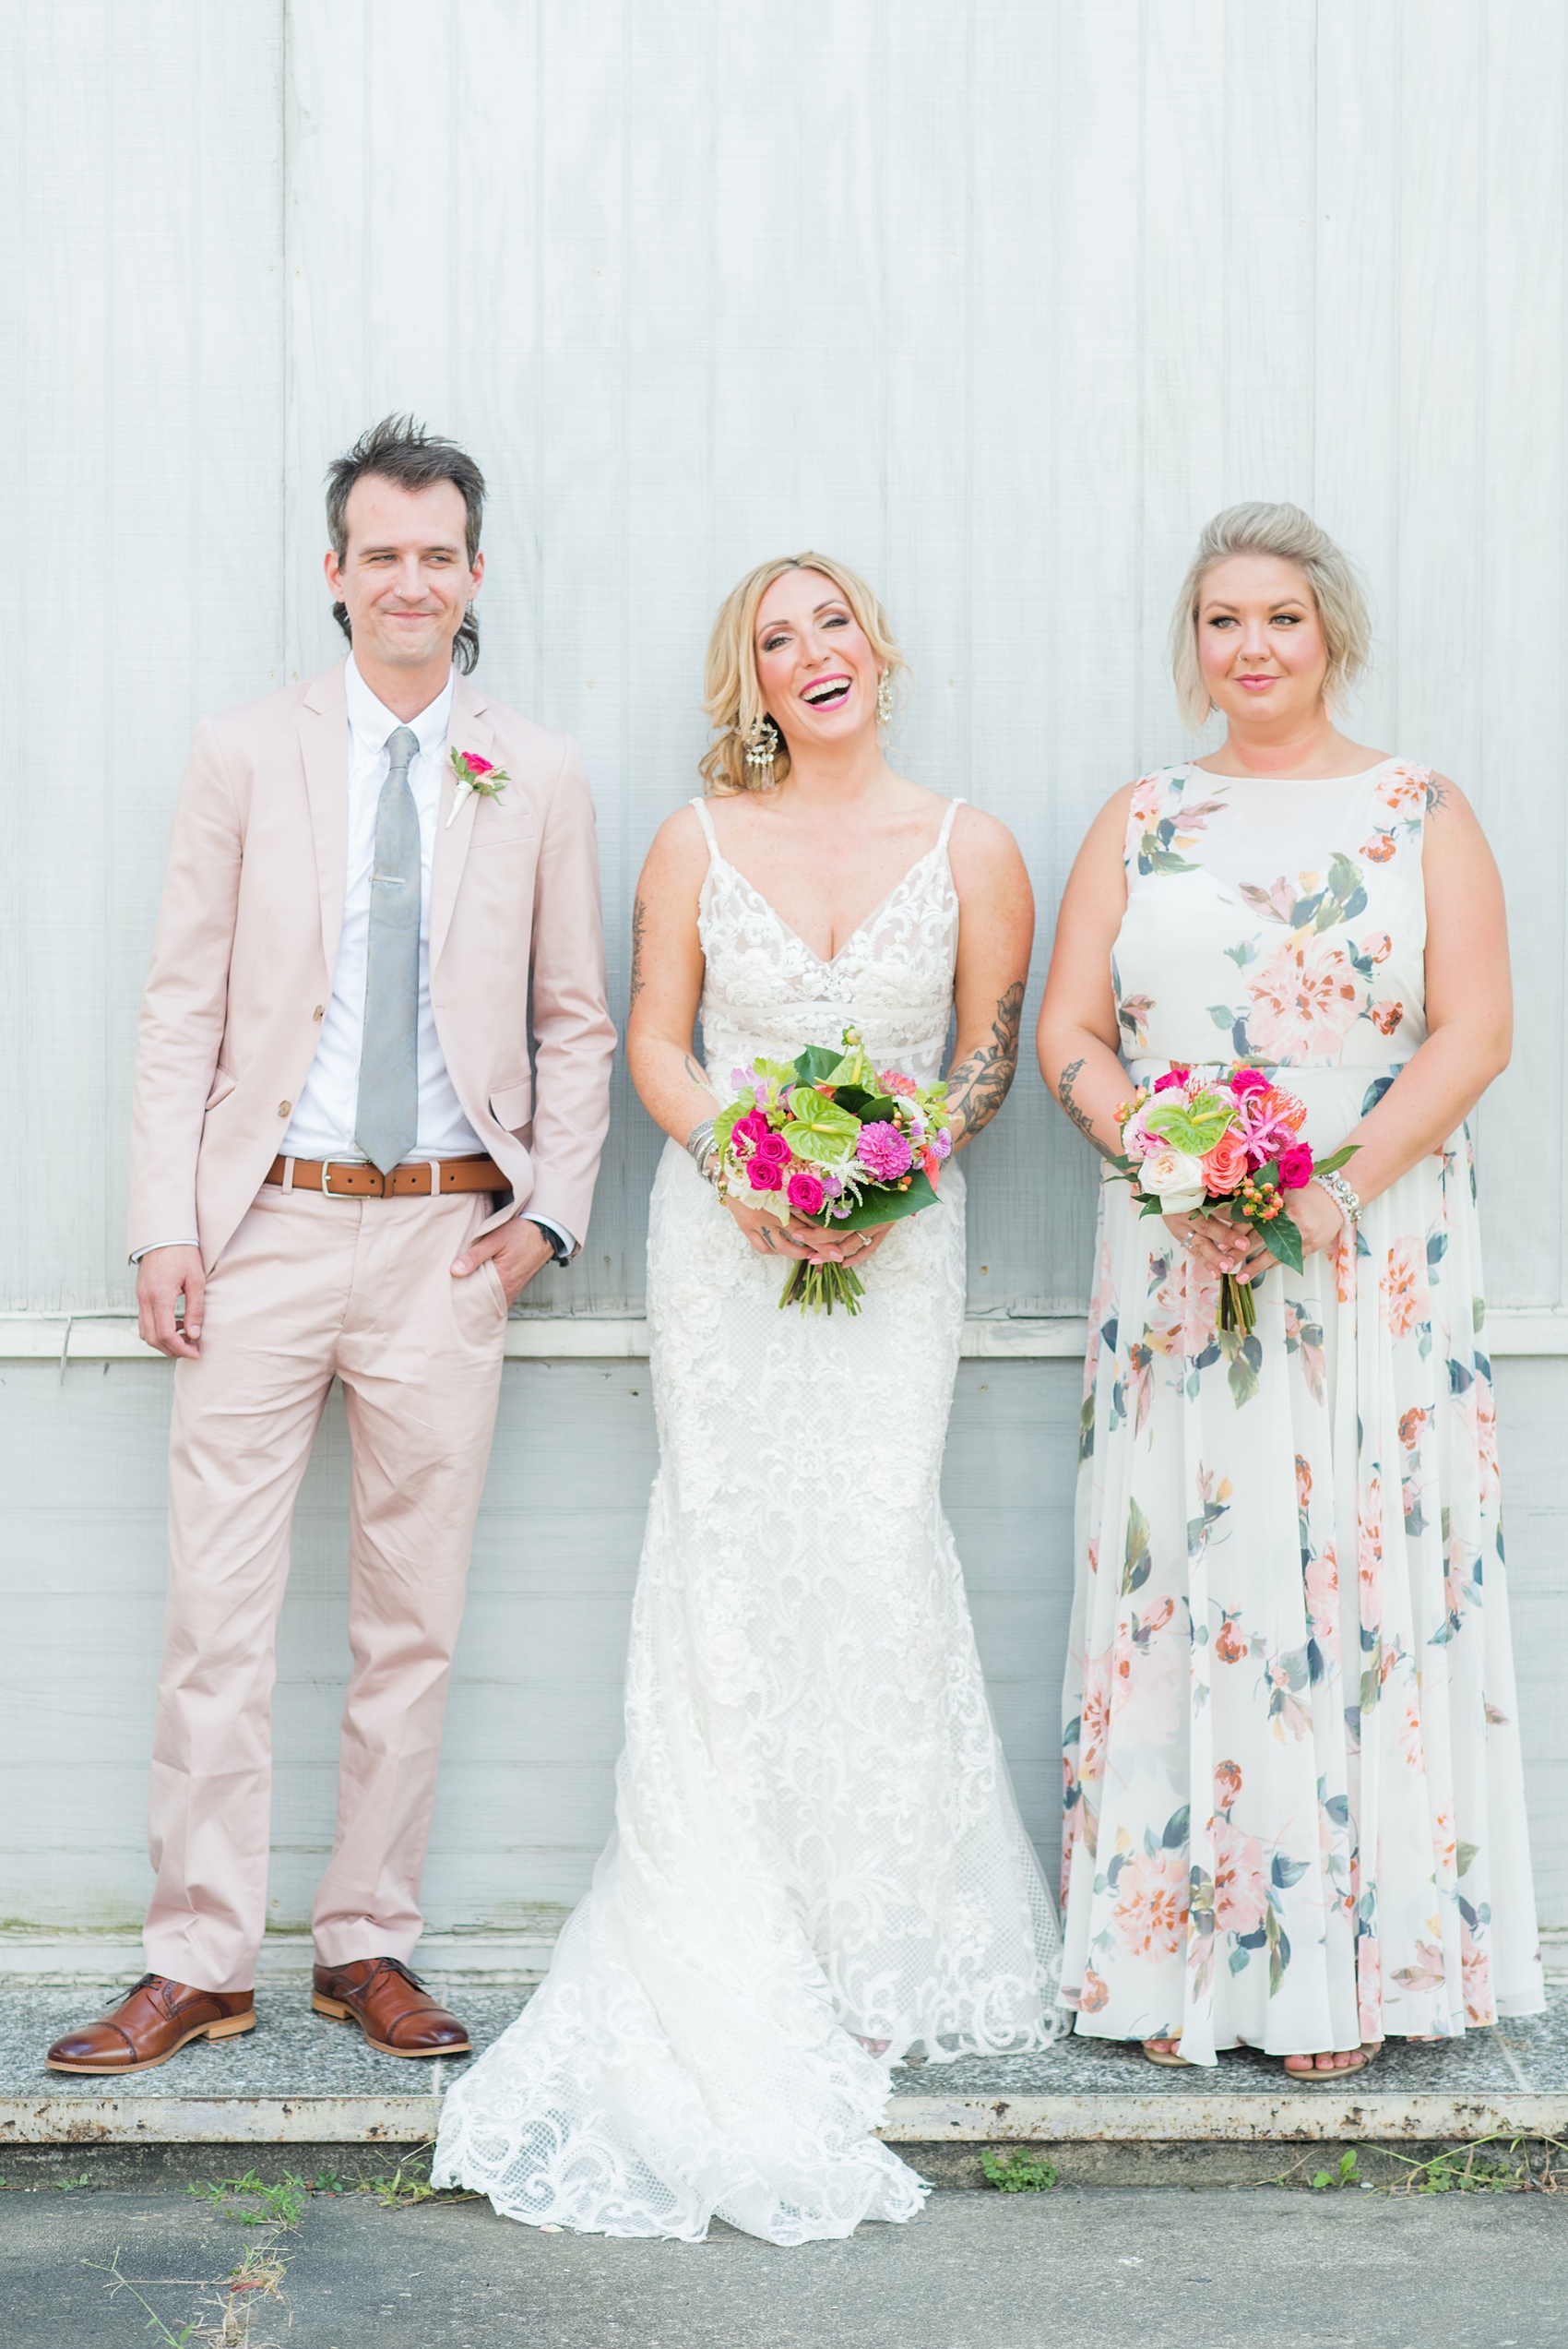 Highgrove Estate wedding photos in North Carolina by Mikkel Paige Photography. The bride + groom wanted urban, rustic pictures outdoors in downtown Fuquay-Varina with their wedding party, near Raleigh. They had a pink + green palette, planned by @asouthernsoiree, with tropical flowers for their tented dinner. The groomsmen wore grey + pink, and maid of honor a floral pattern dress. Click for pictures from their awesome party! #NorthCarolinaVenues #MikkelPaige #ASouthernSoiree #weddingparty